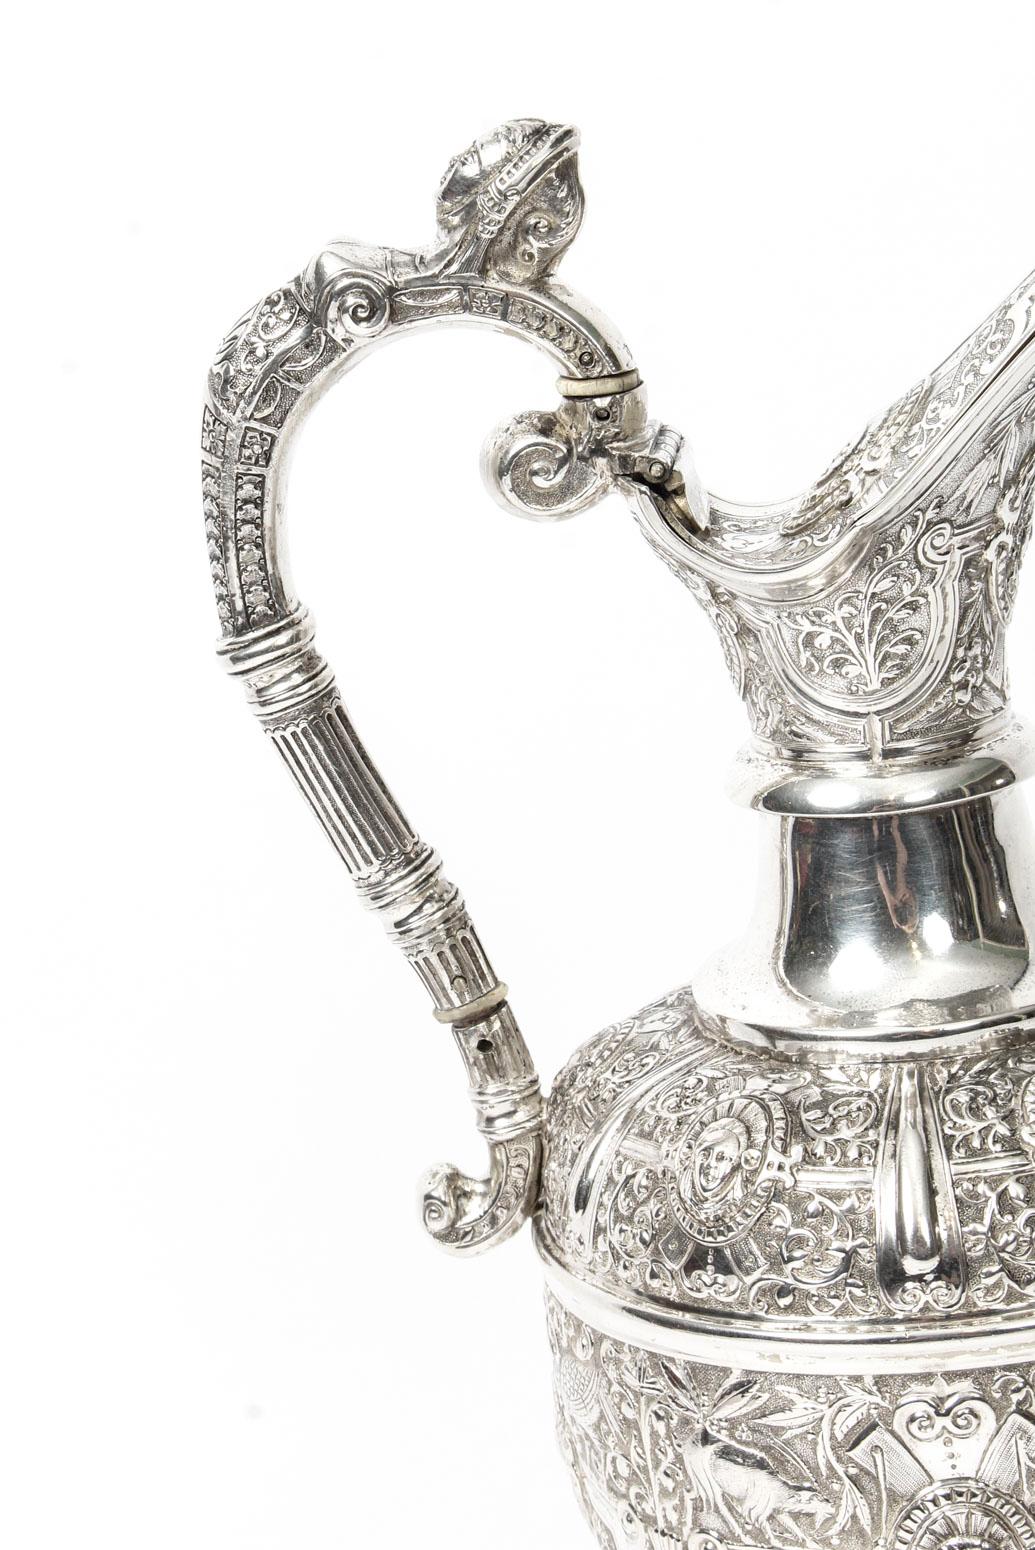 A wonderful antique English Victorian sterling silver claret jug with hallmarks for Glasgow 1878 and the maker's mark D.C.R, for the renowned Glasgow silversmith David Crichton Rait.

It has an impressive c scroll handle and is embellished with